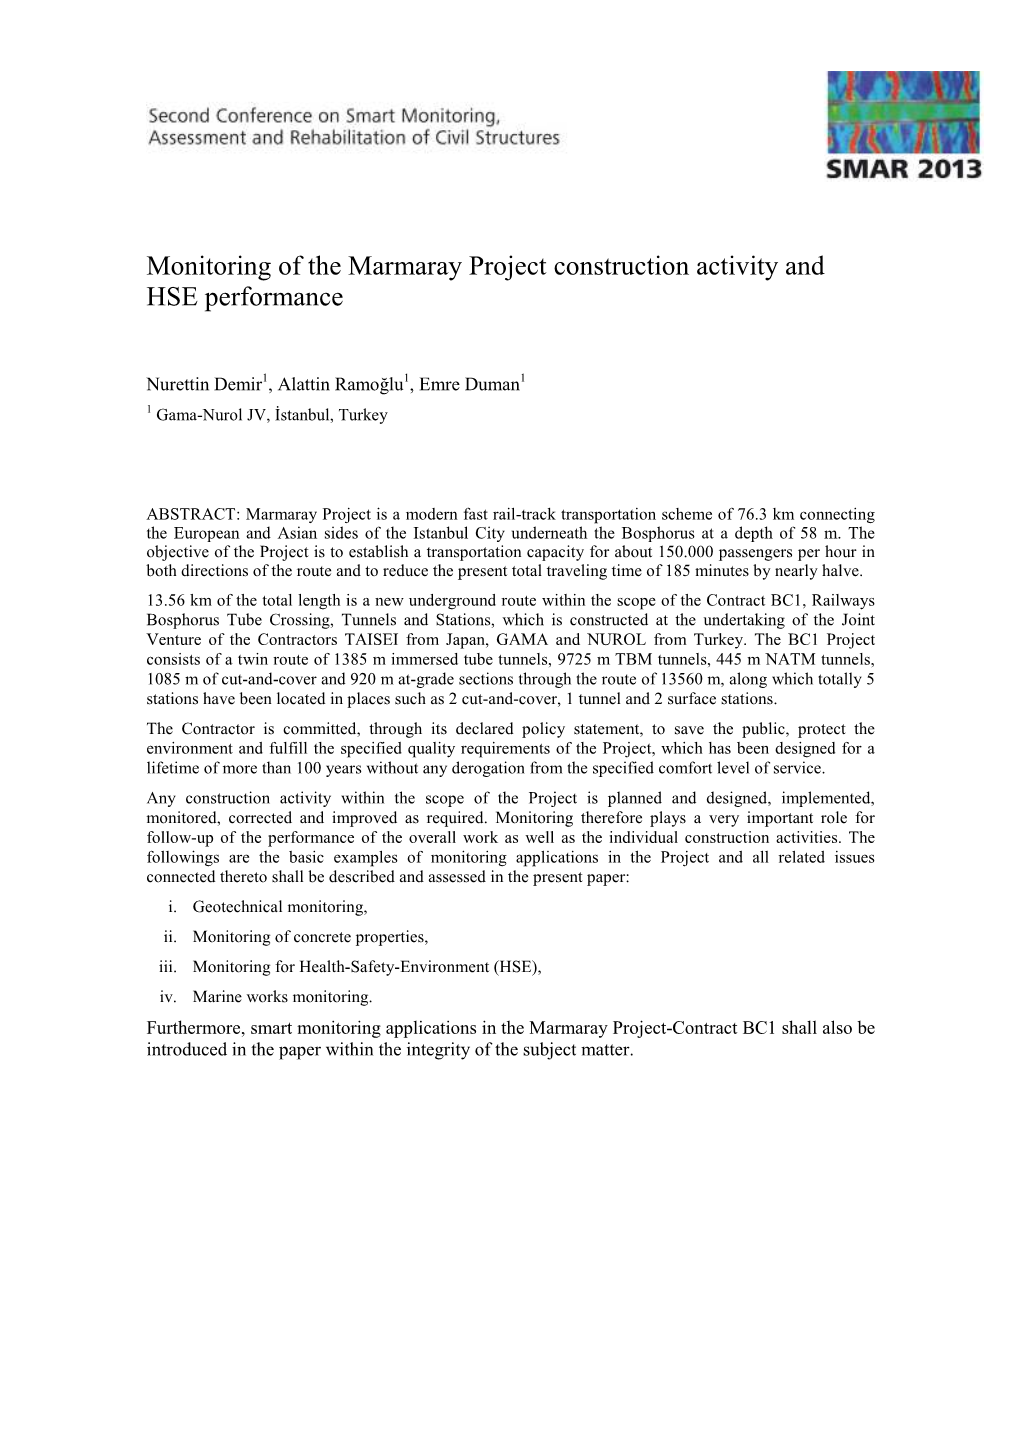 Monitoring of the Marmaray Project Construction Activity and HSE Performance